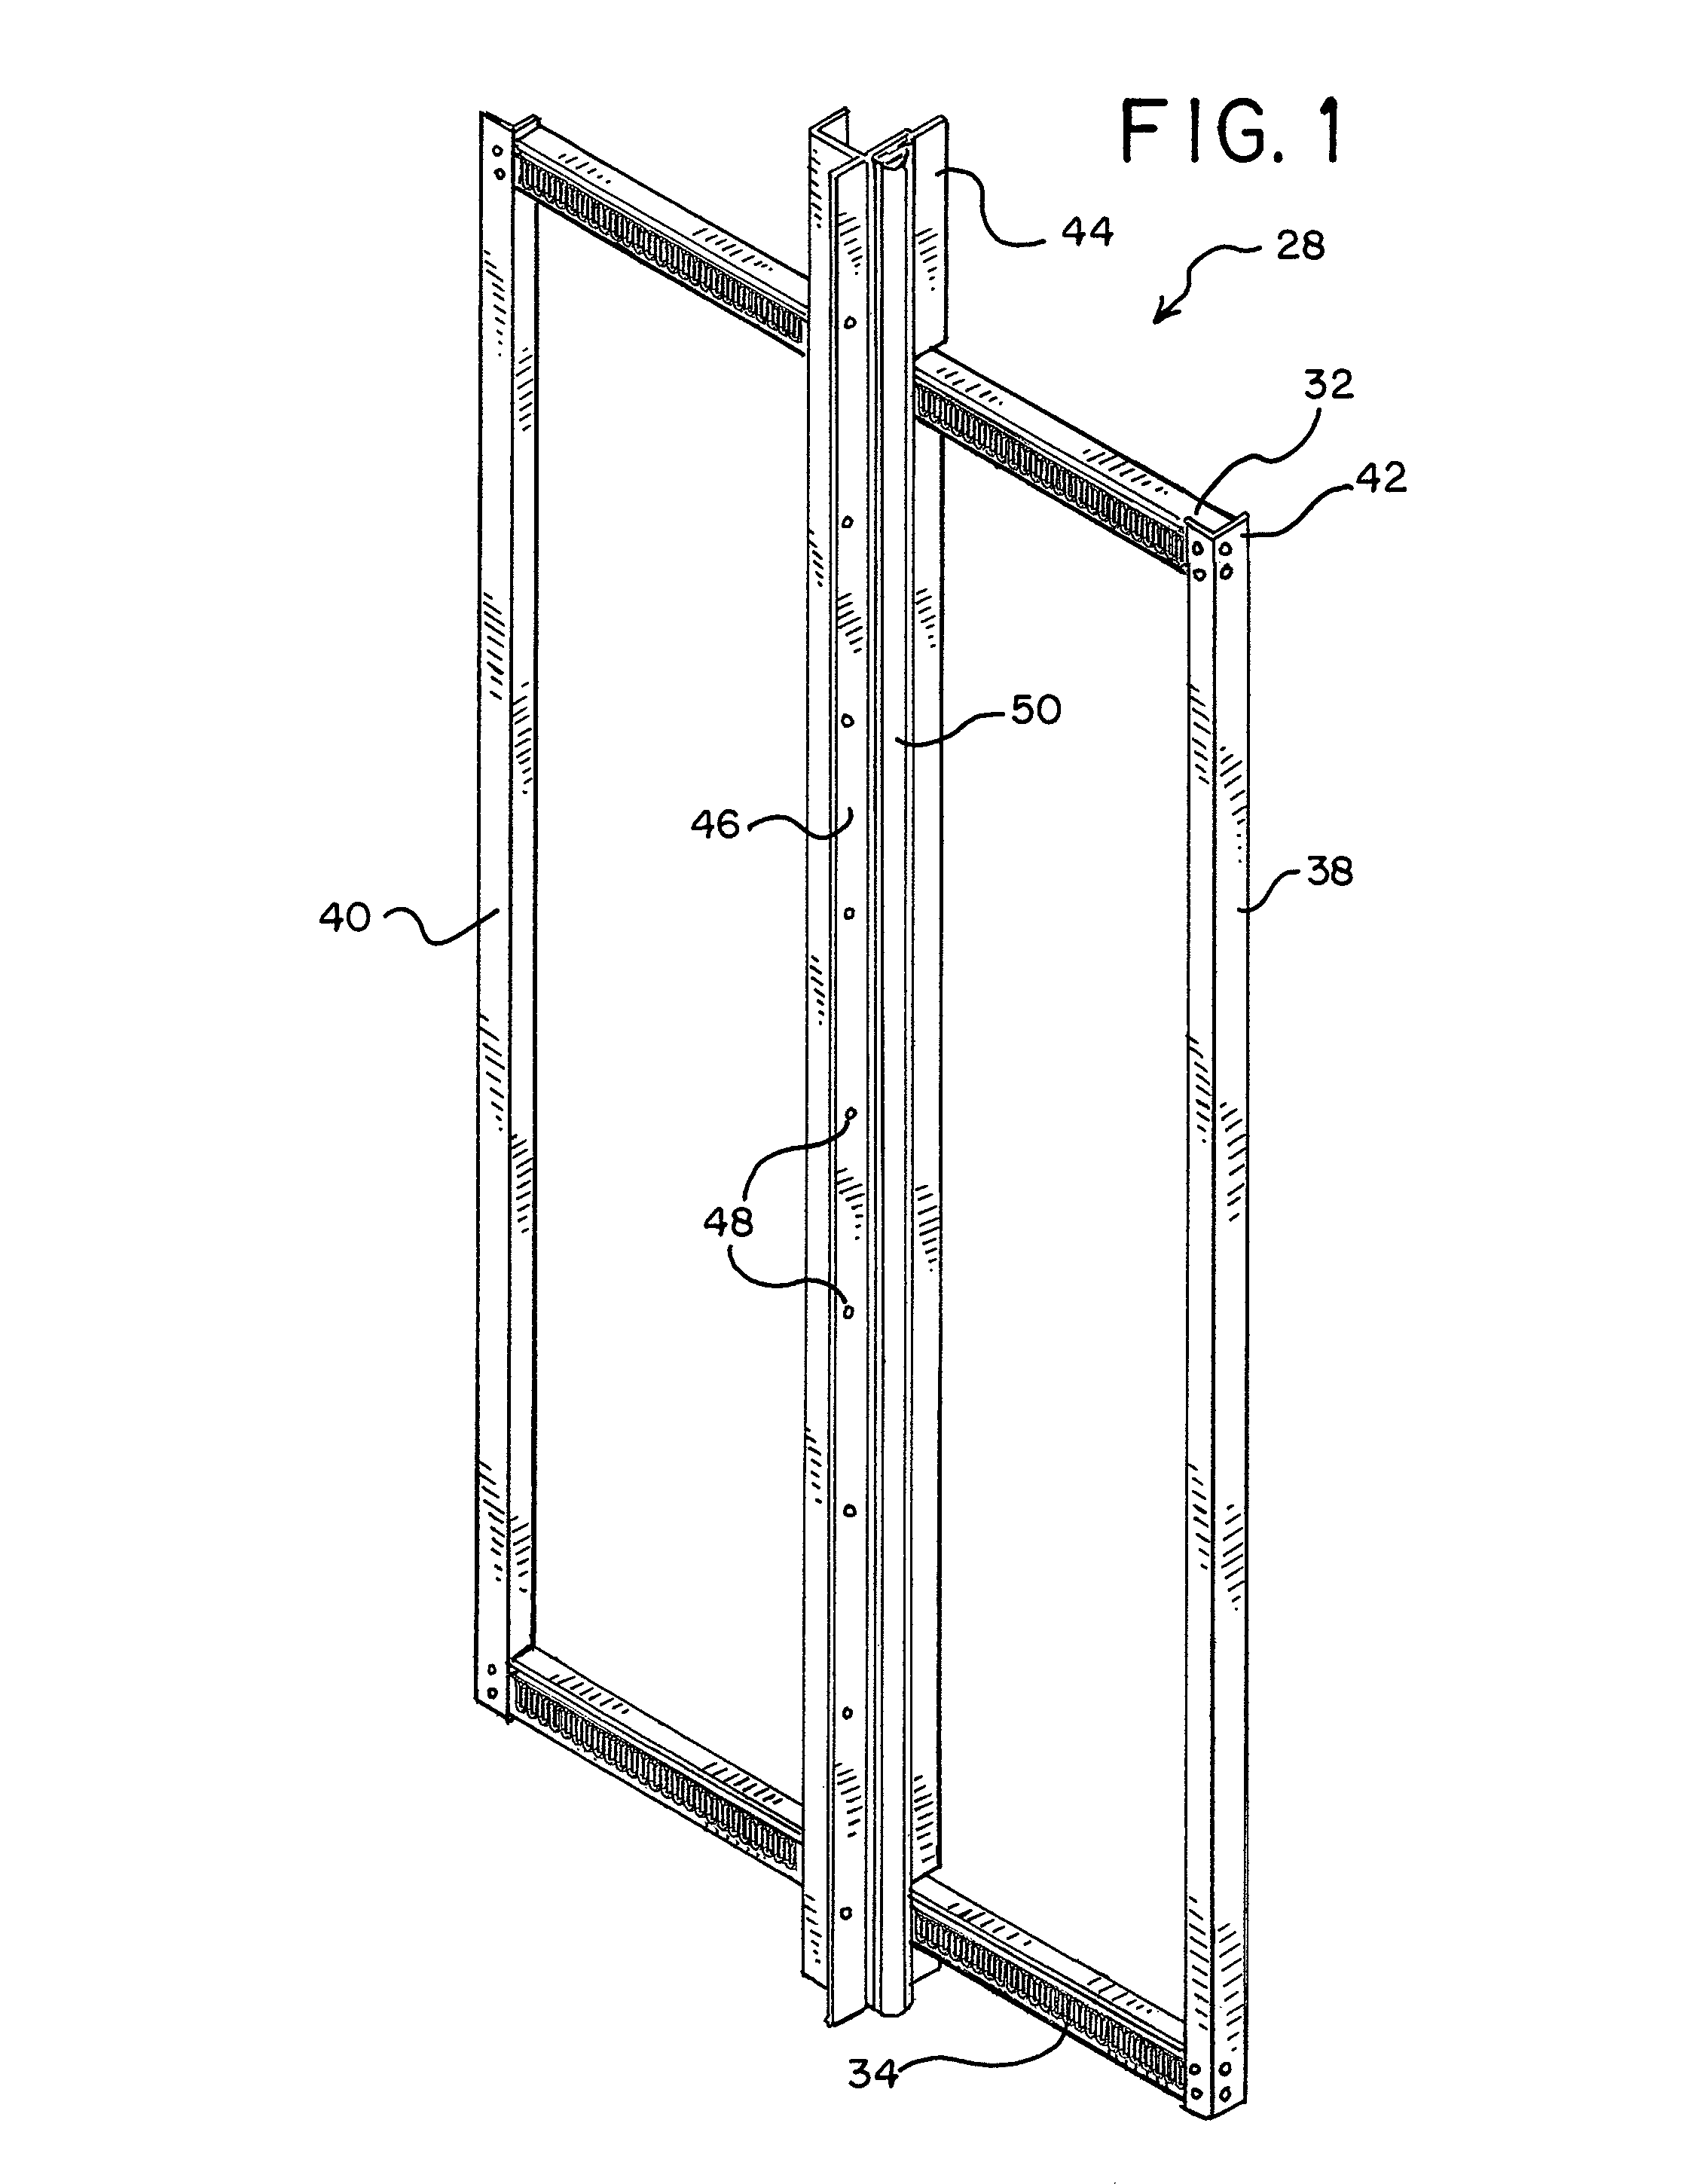 Retractable room actuation assembly for recreational vehicle